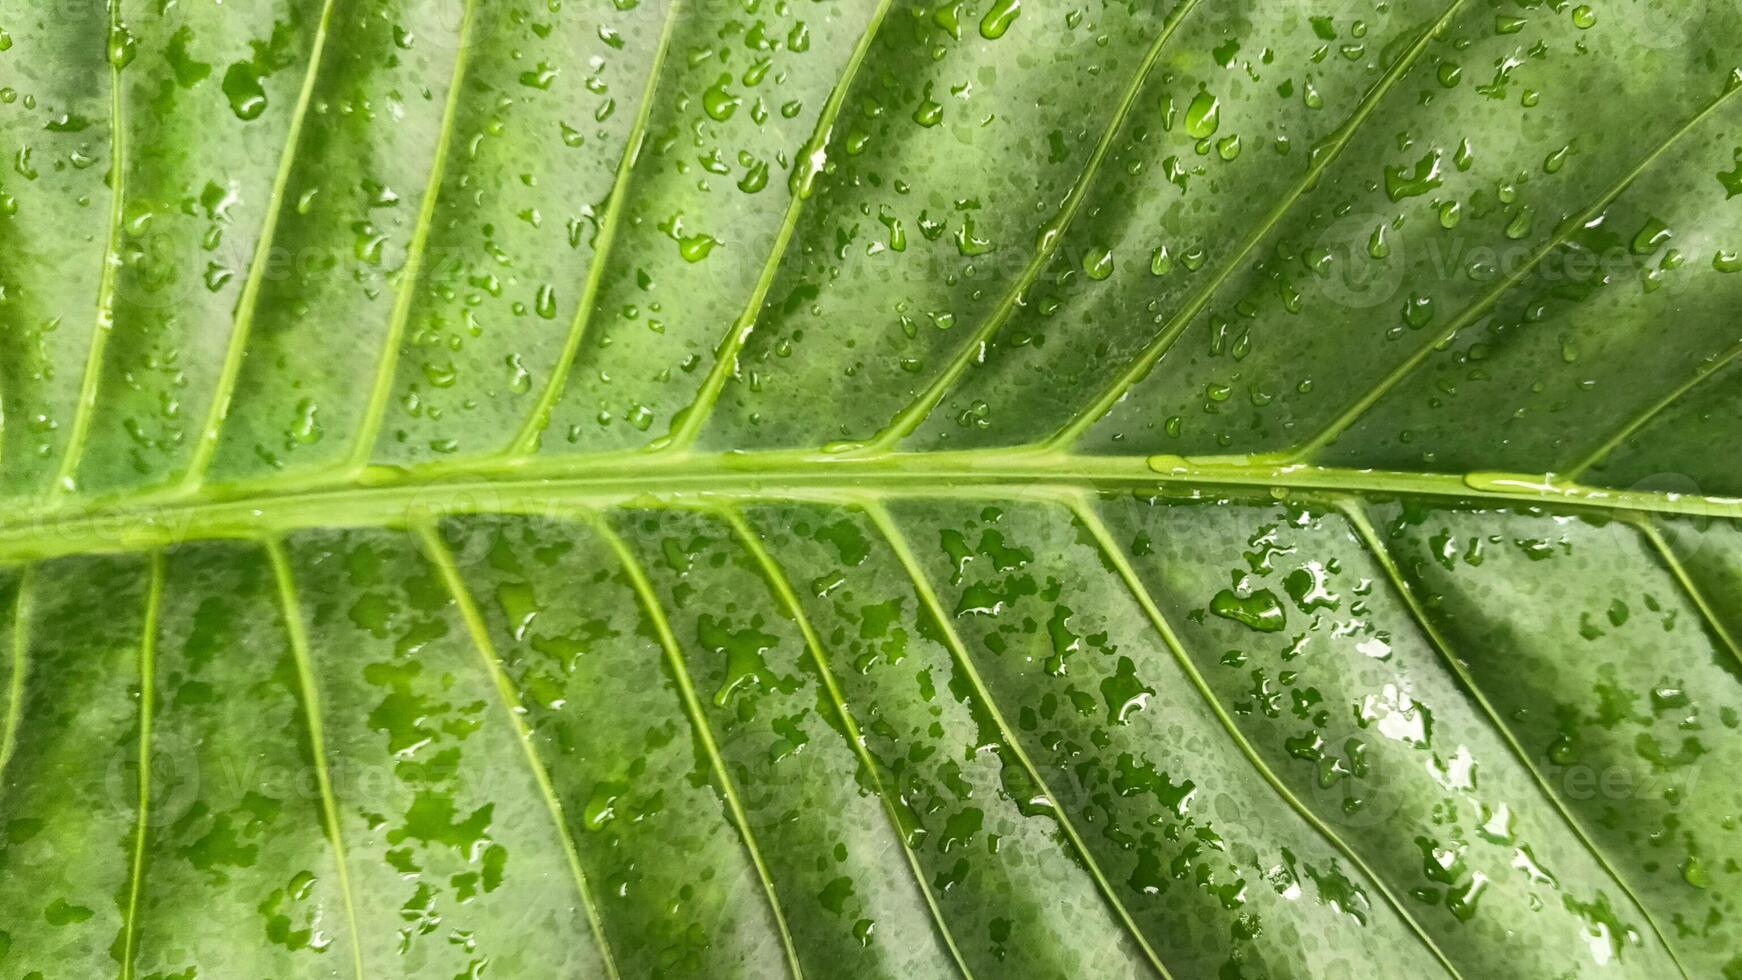 Portrait of taro leaves exposed to morning dew photo